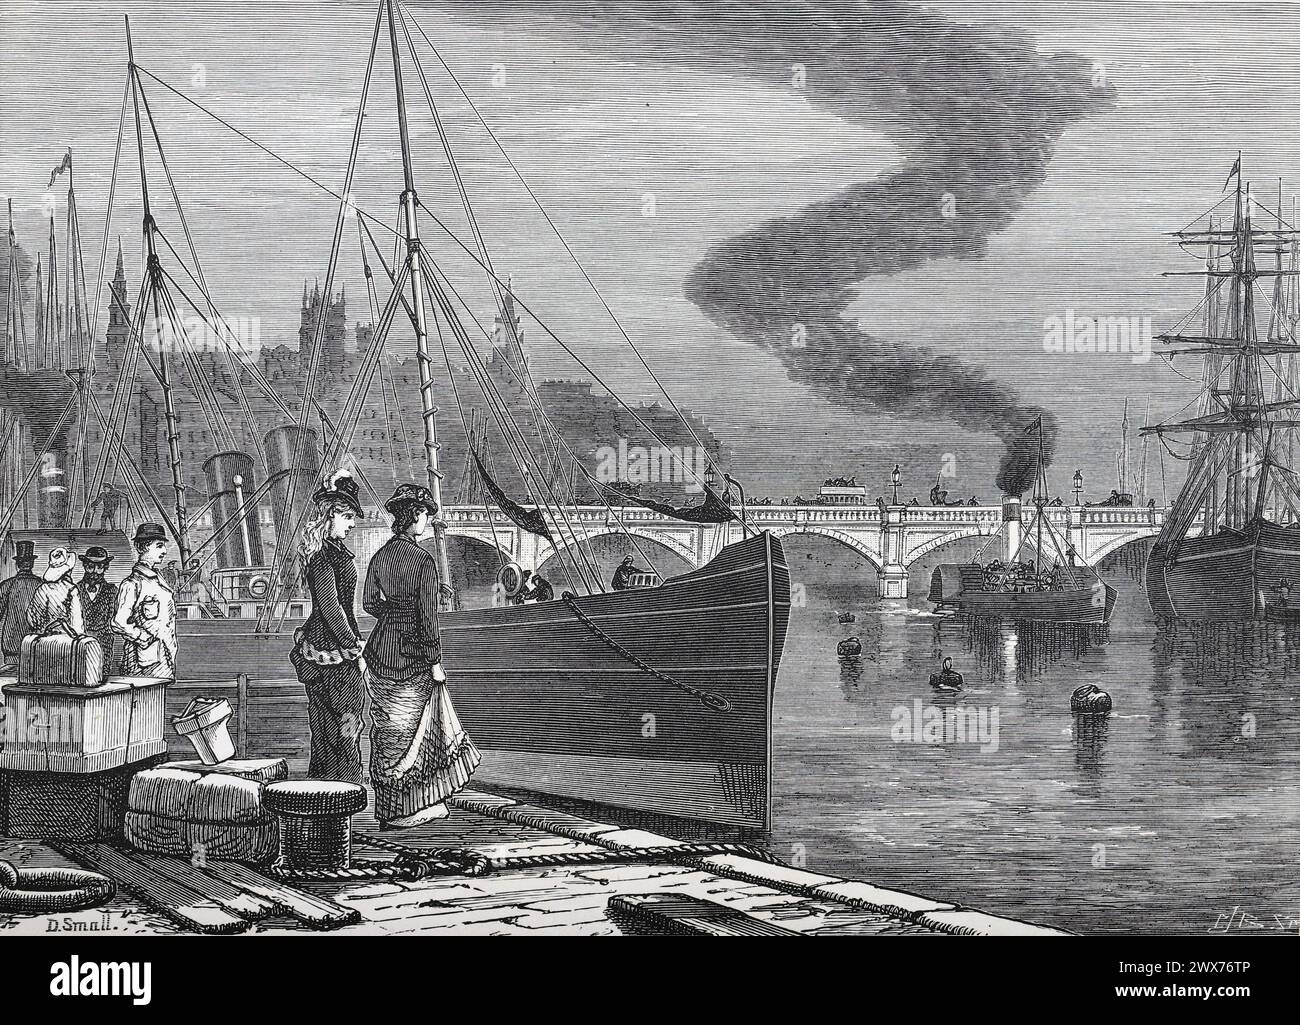 View of the River Clyde in Glasgow in the 19th century; Black and White Illustration from the 'Our Own Country' published by Cassell, Petter, Galpin & Co. Late 19th century. Stock Photo